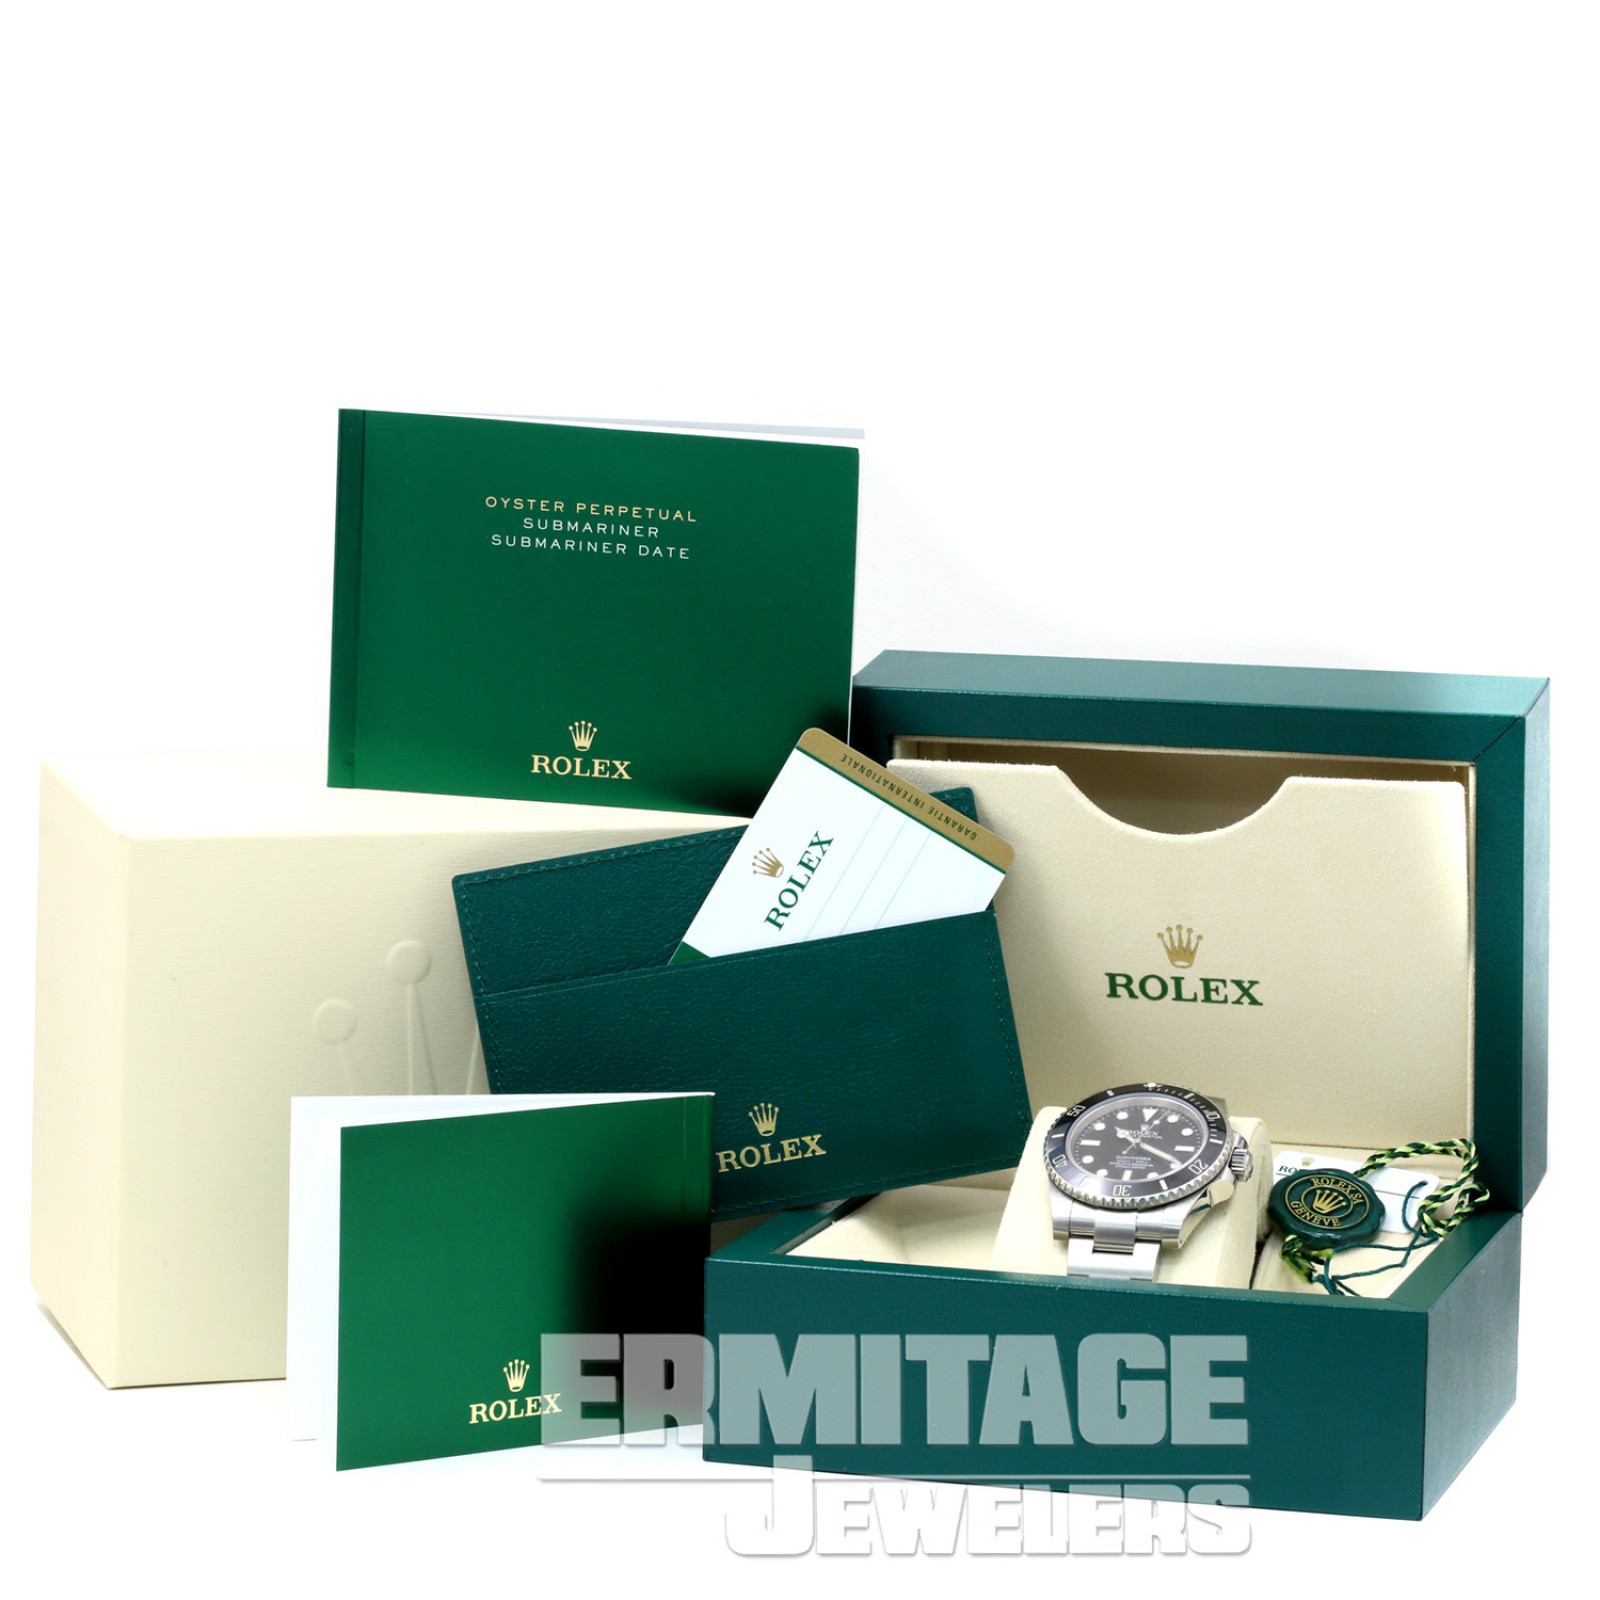 Pre-Owned Rolex Submariner 114060